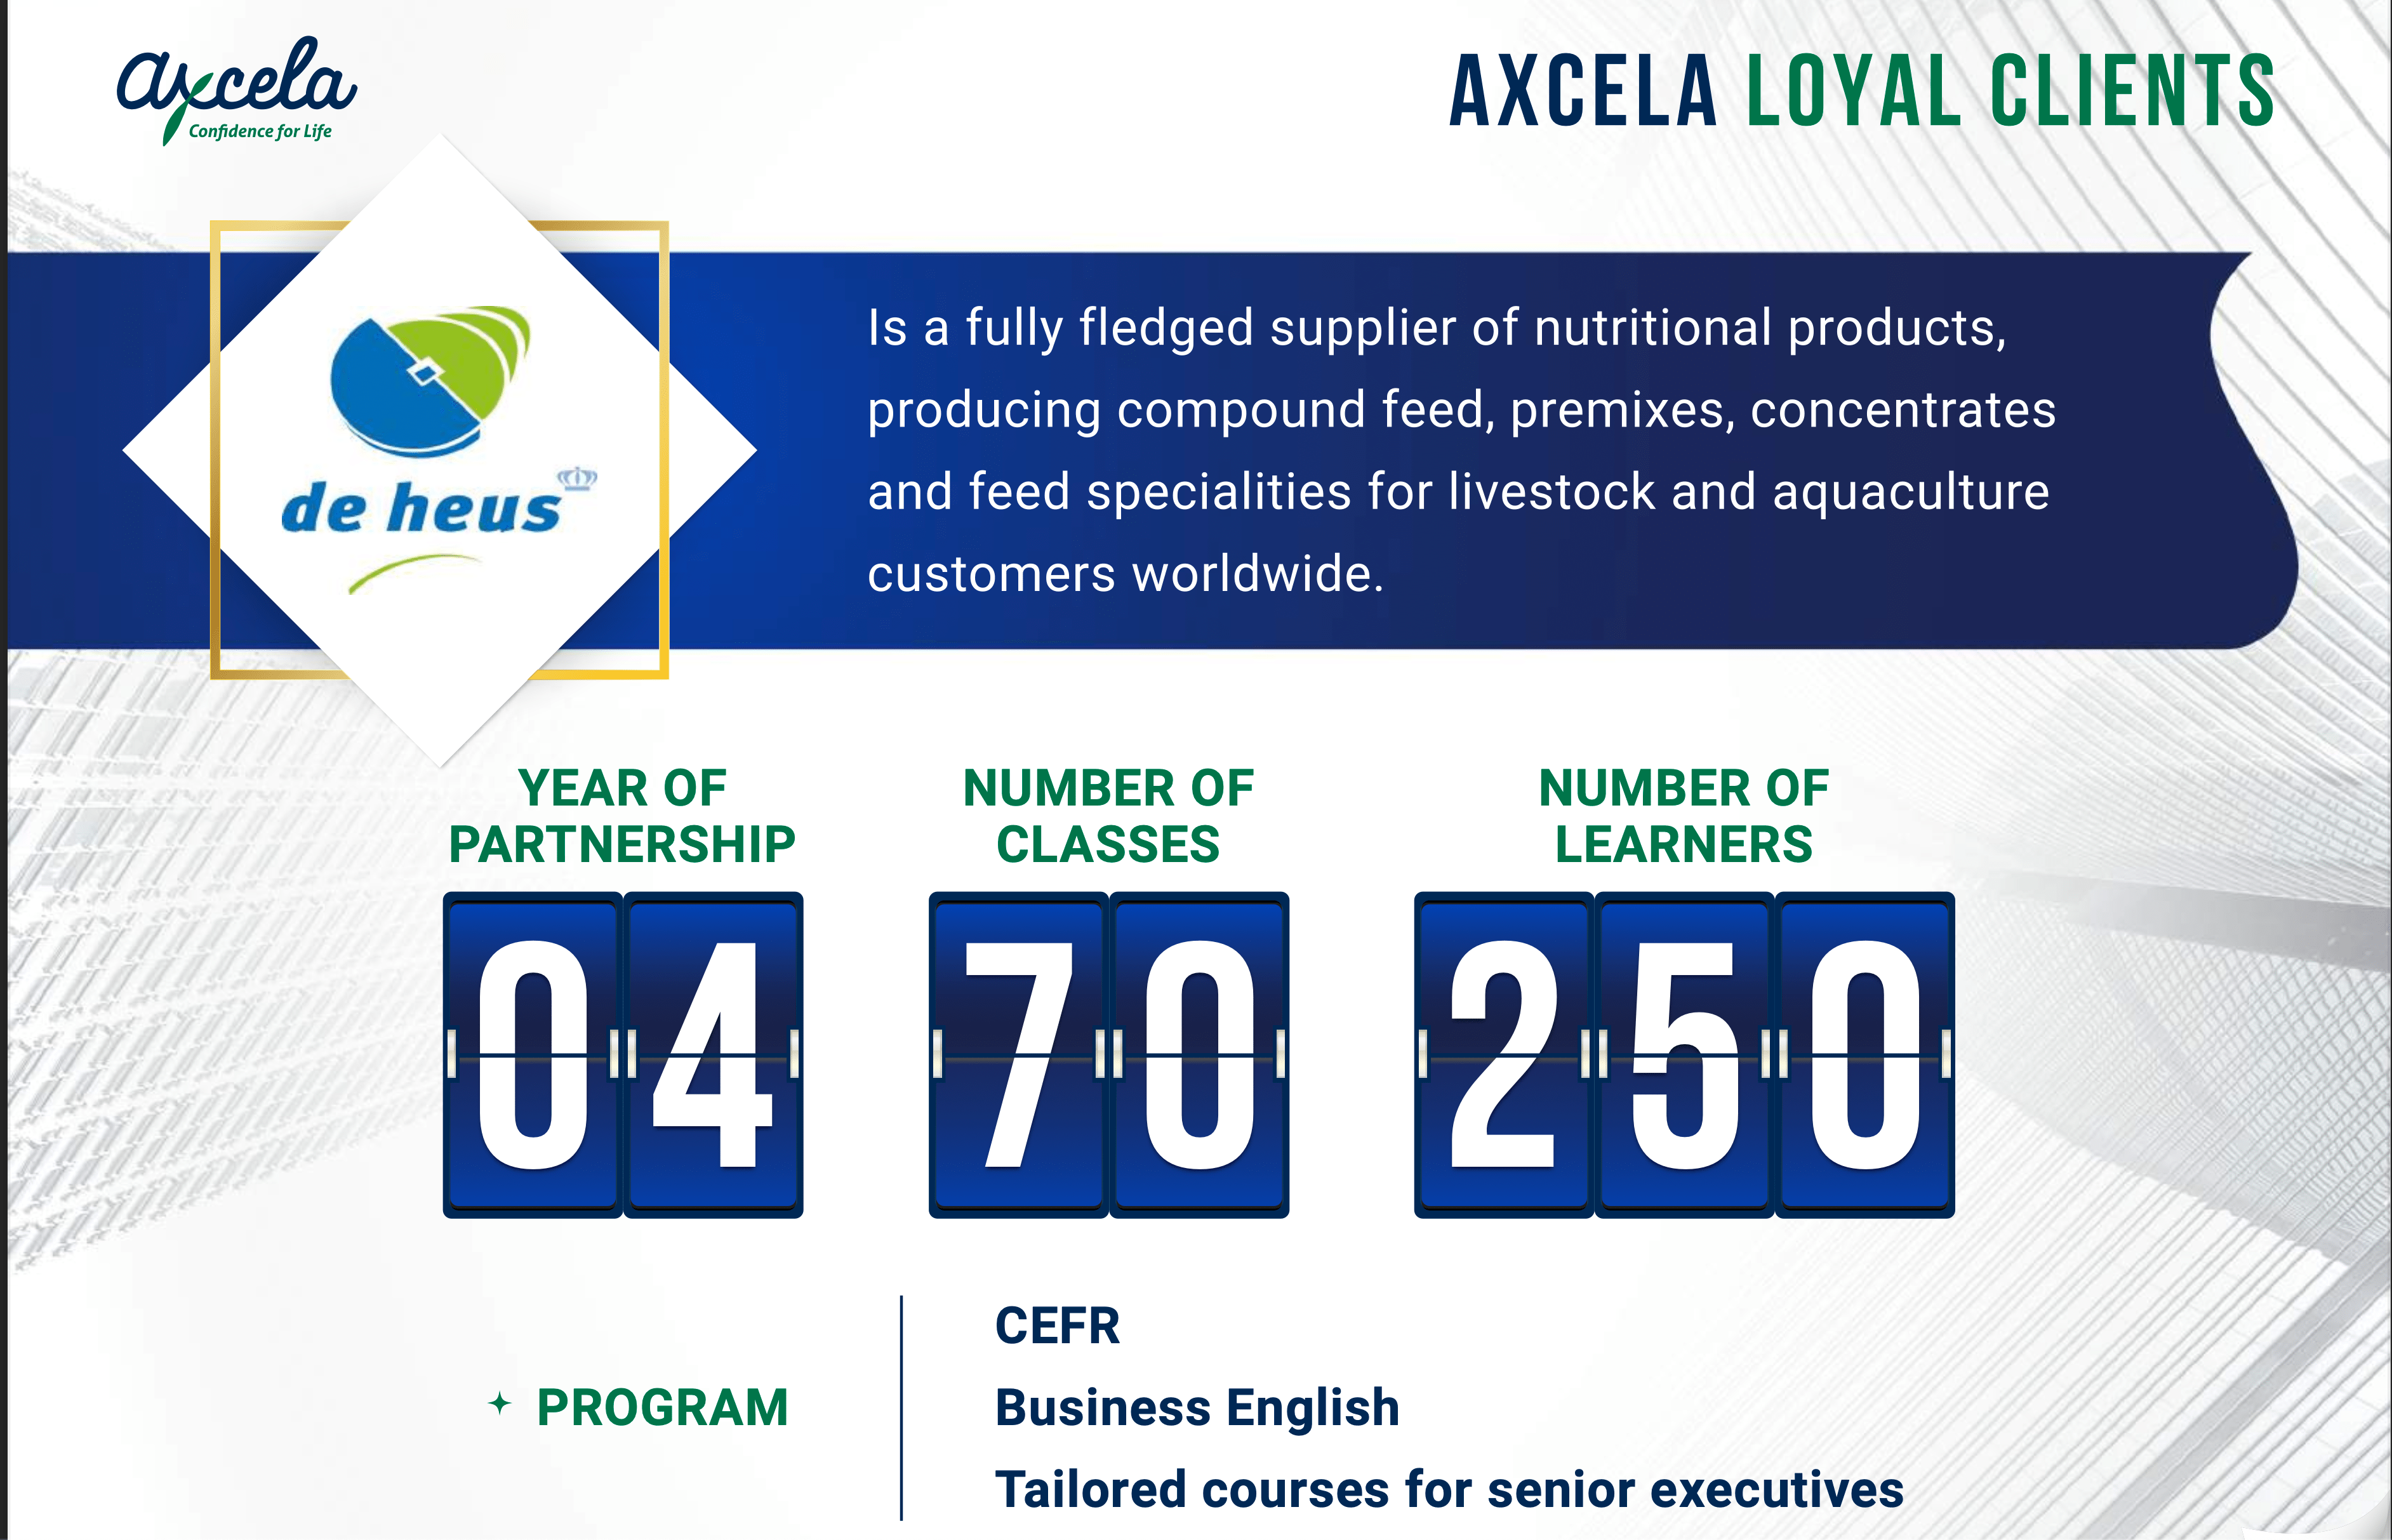 Continuous partner of Axcela for 05 years